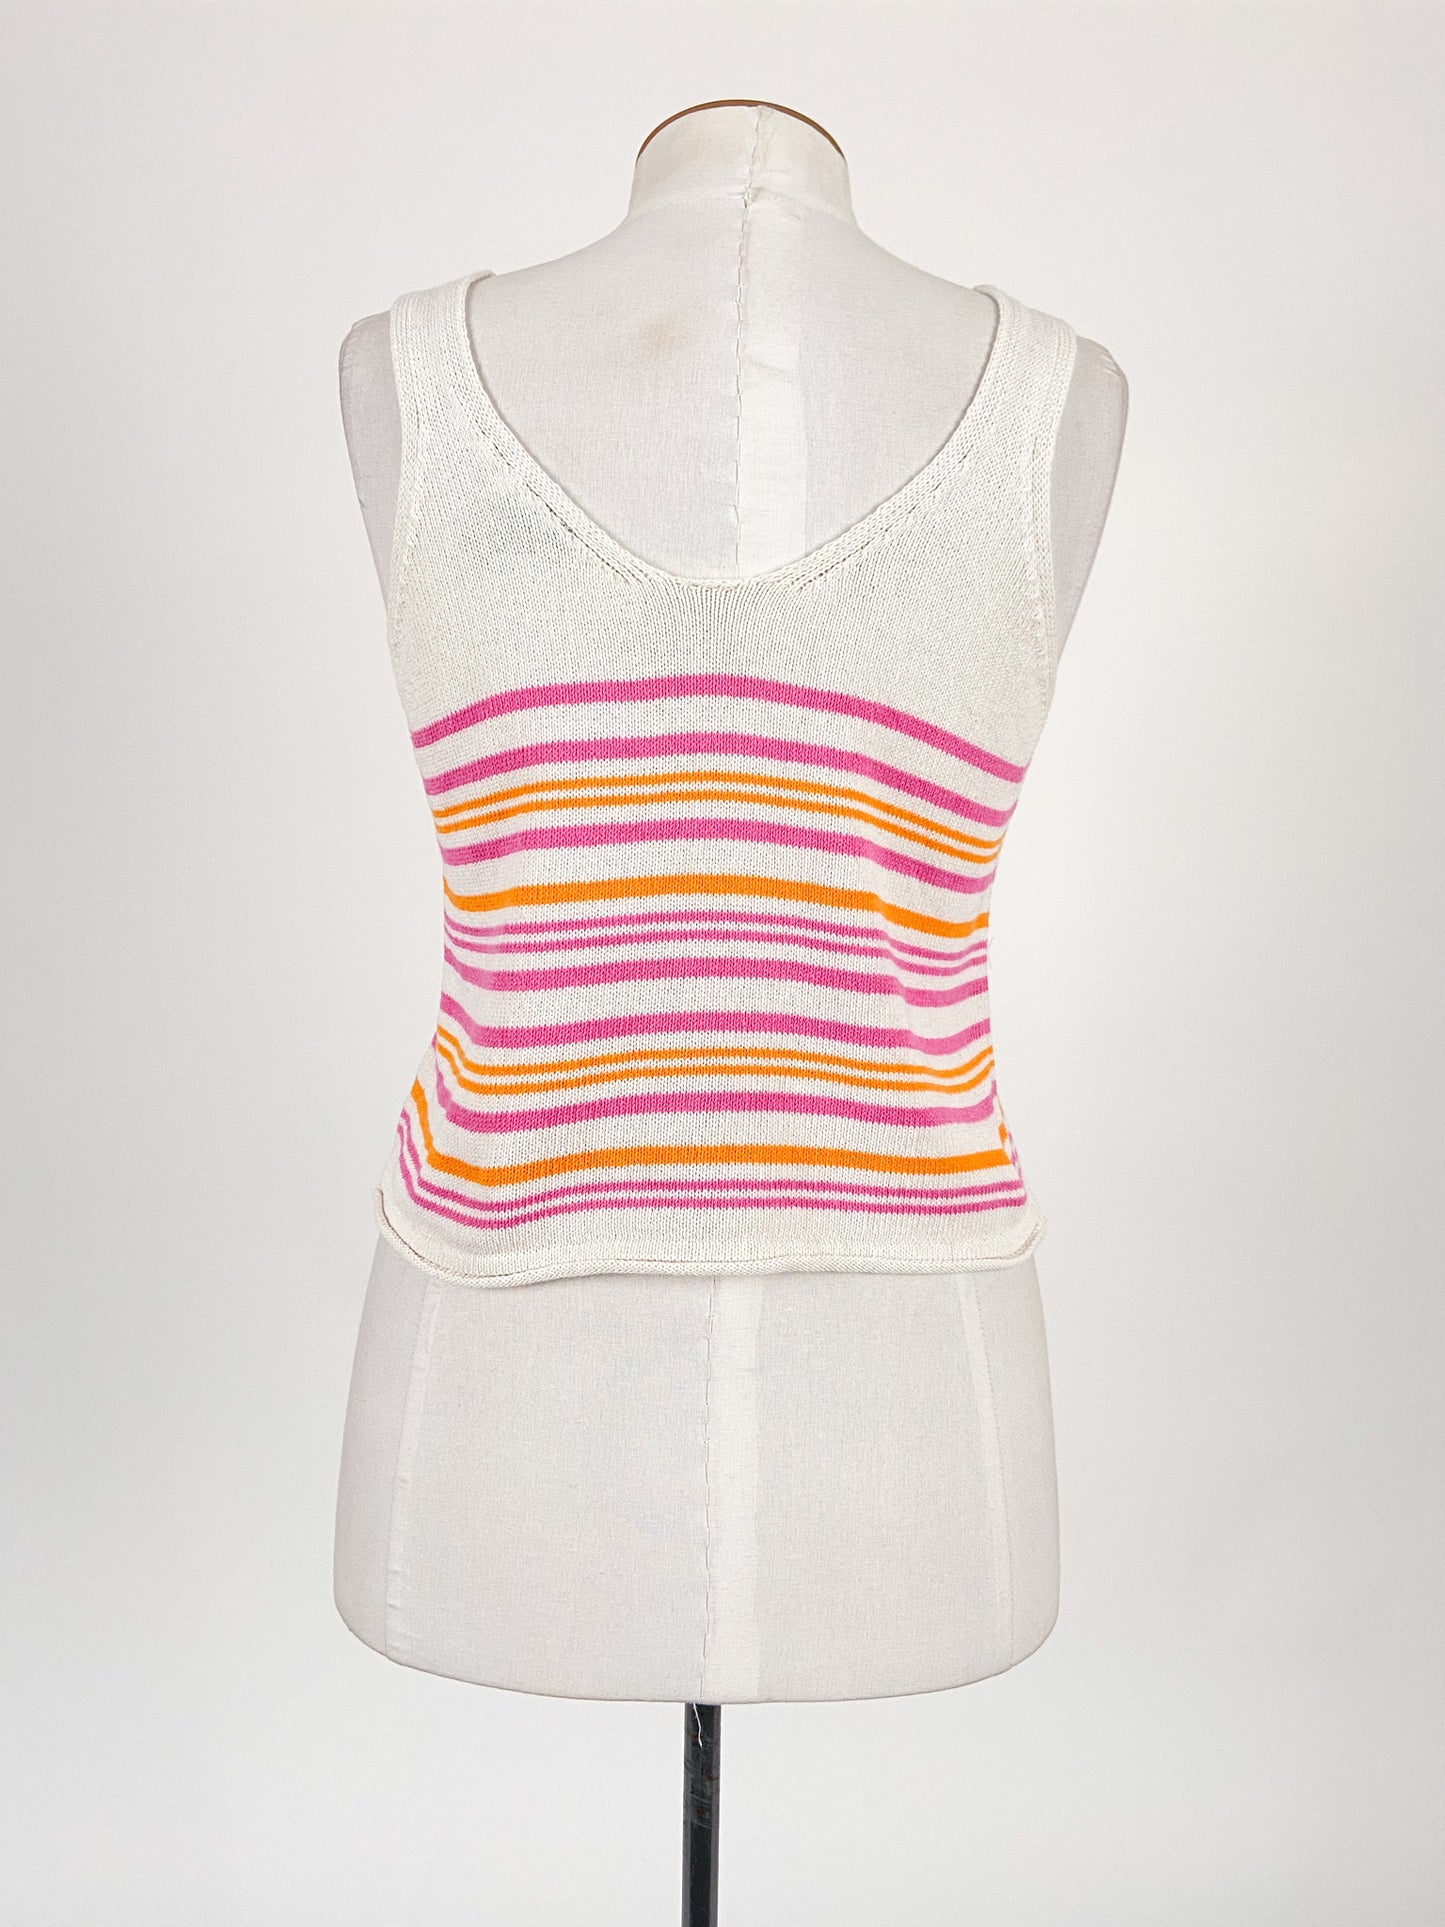 New Look | Multicoloured Casual Top | Size 12